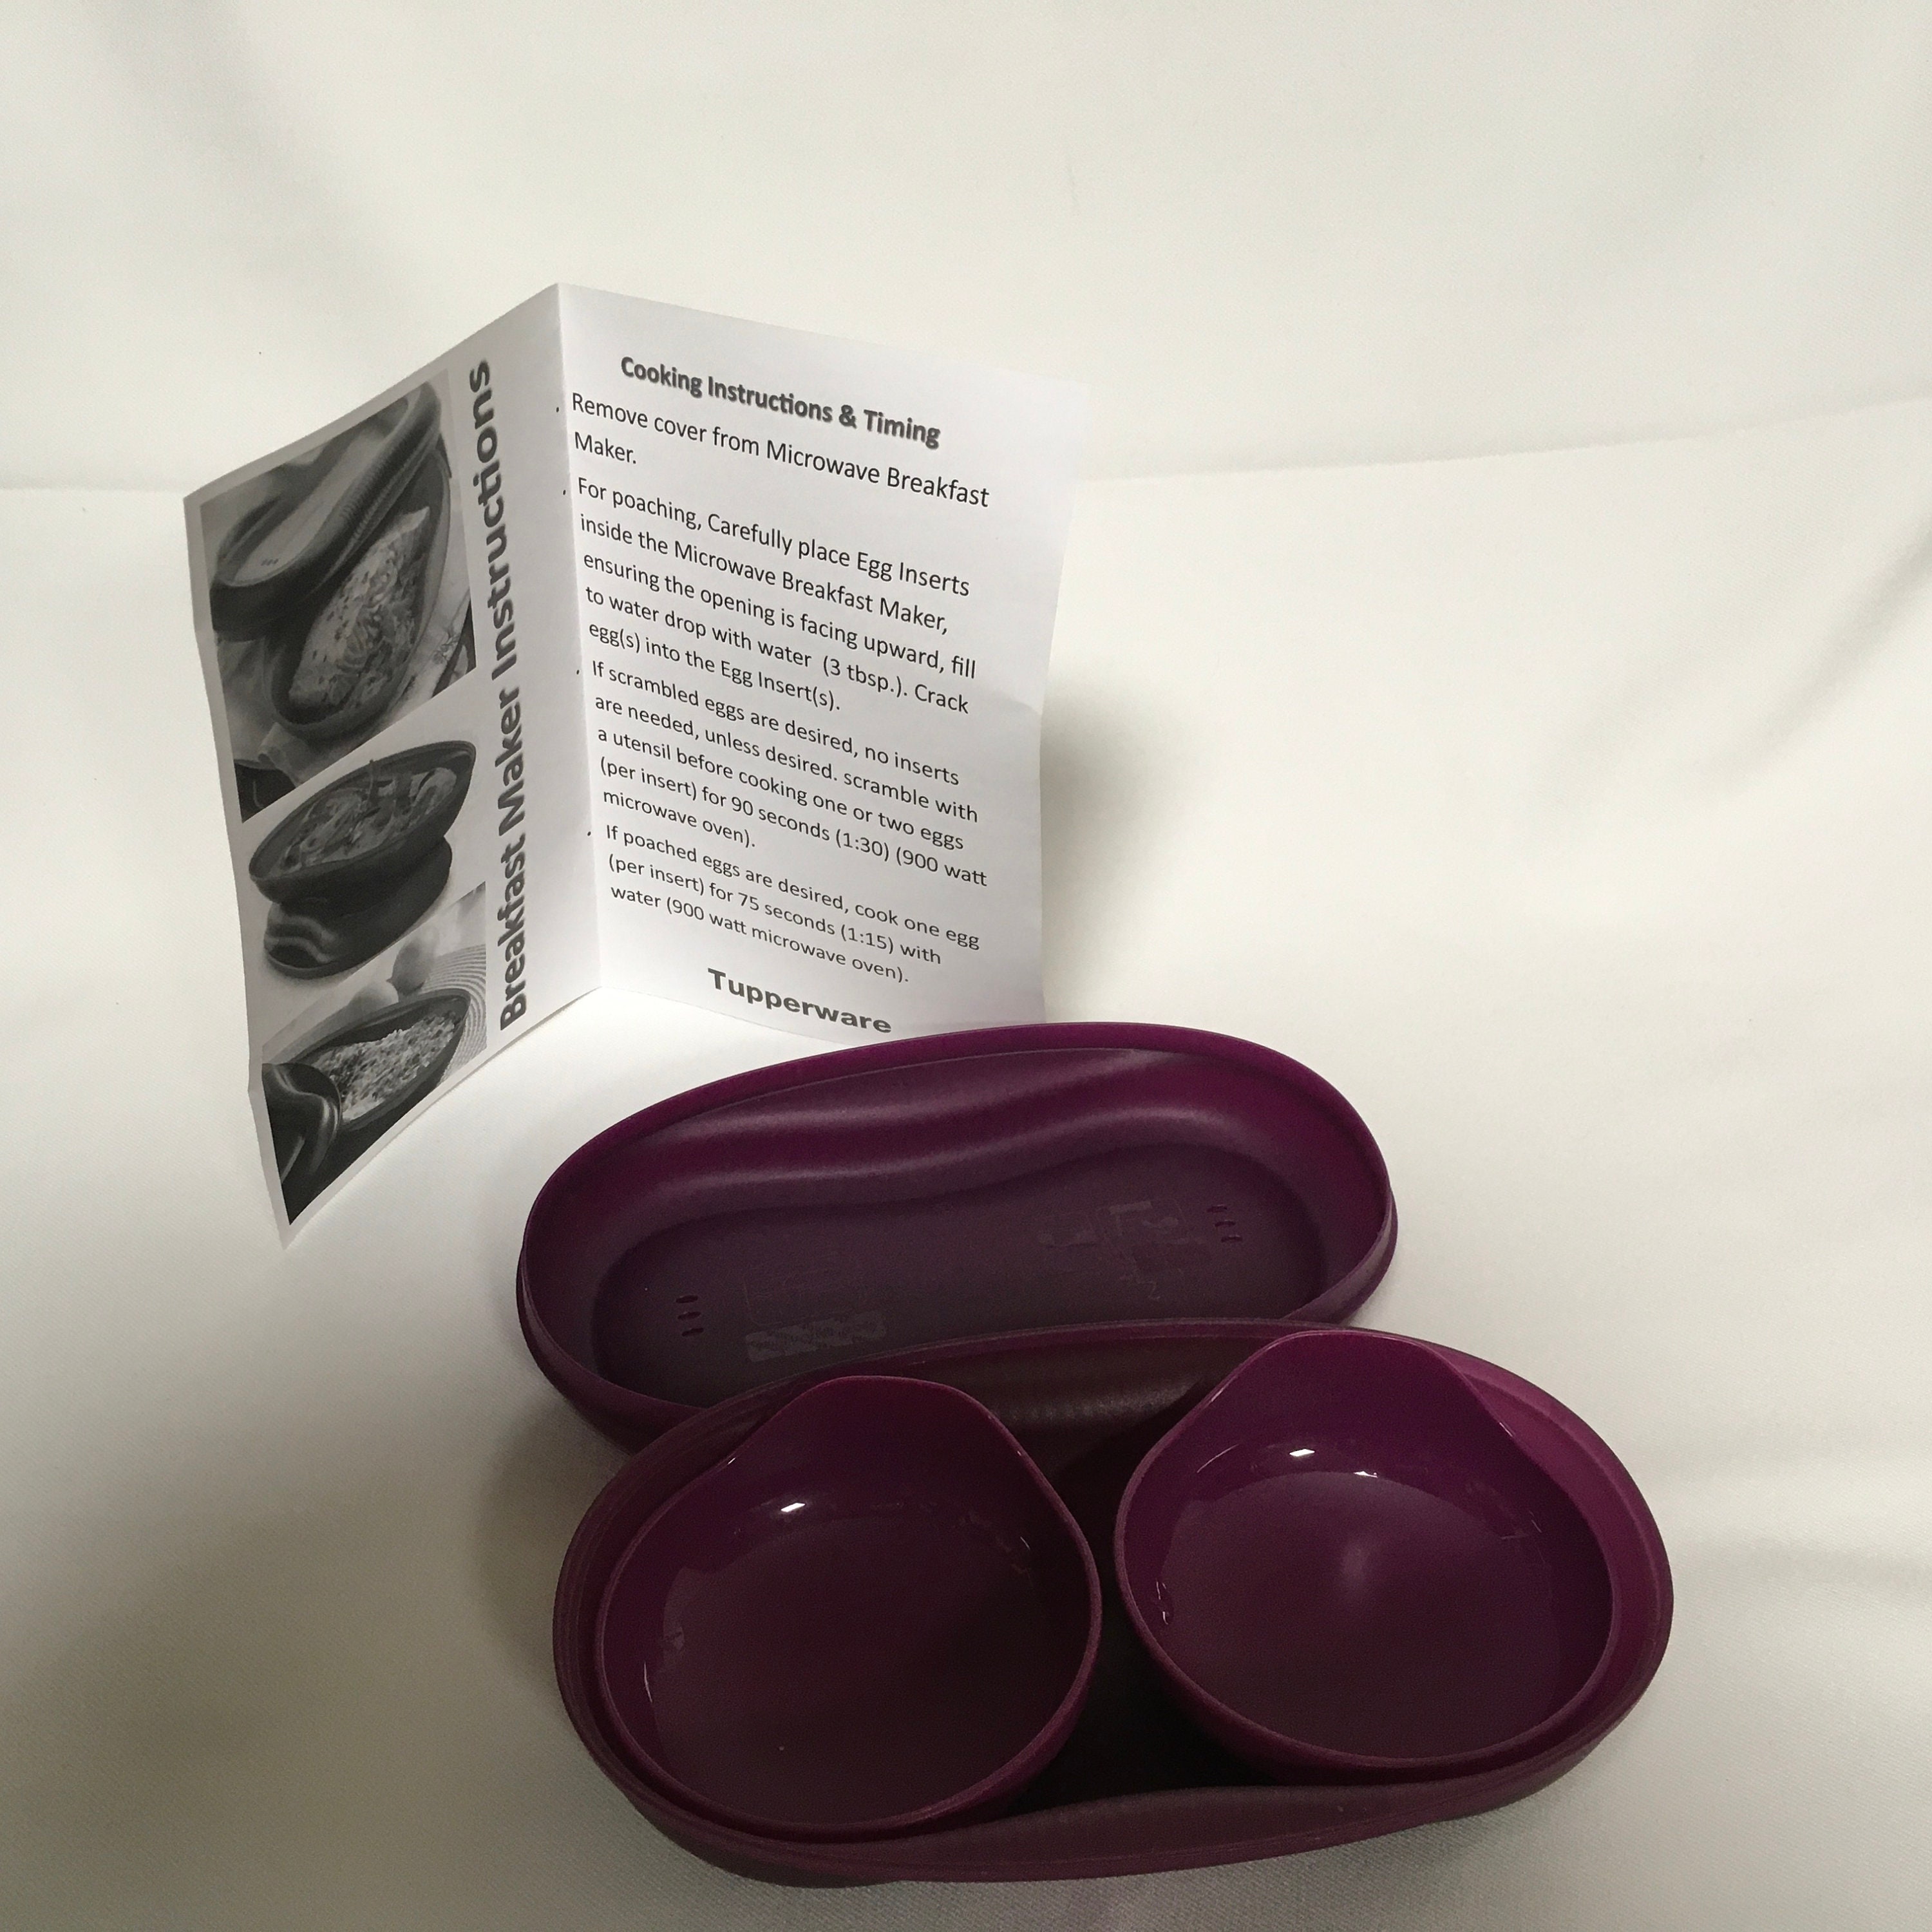 Elite Gourmet 7-Eggs Purple Easy Egg Cooker with Poaching Tray